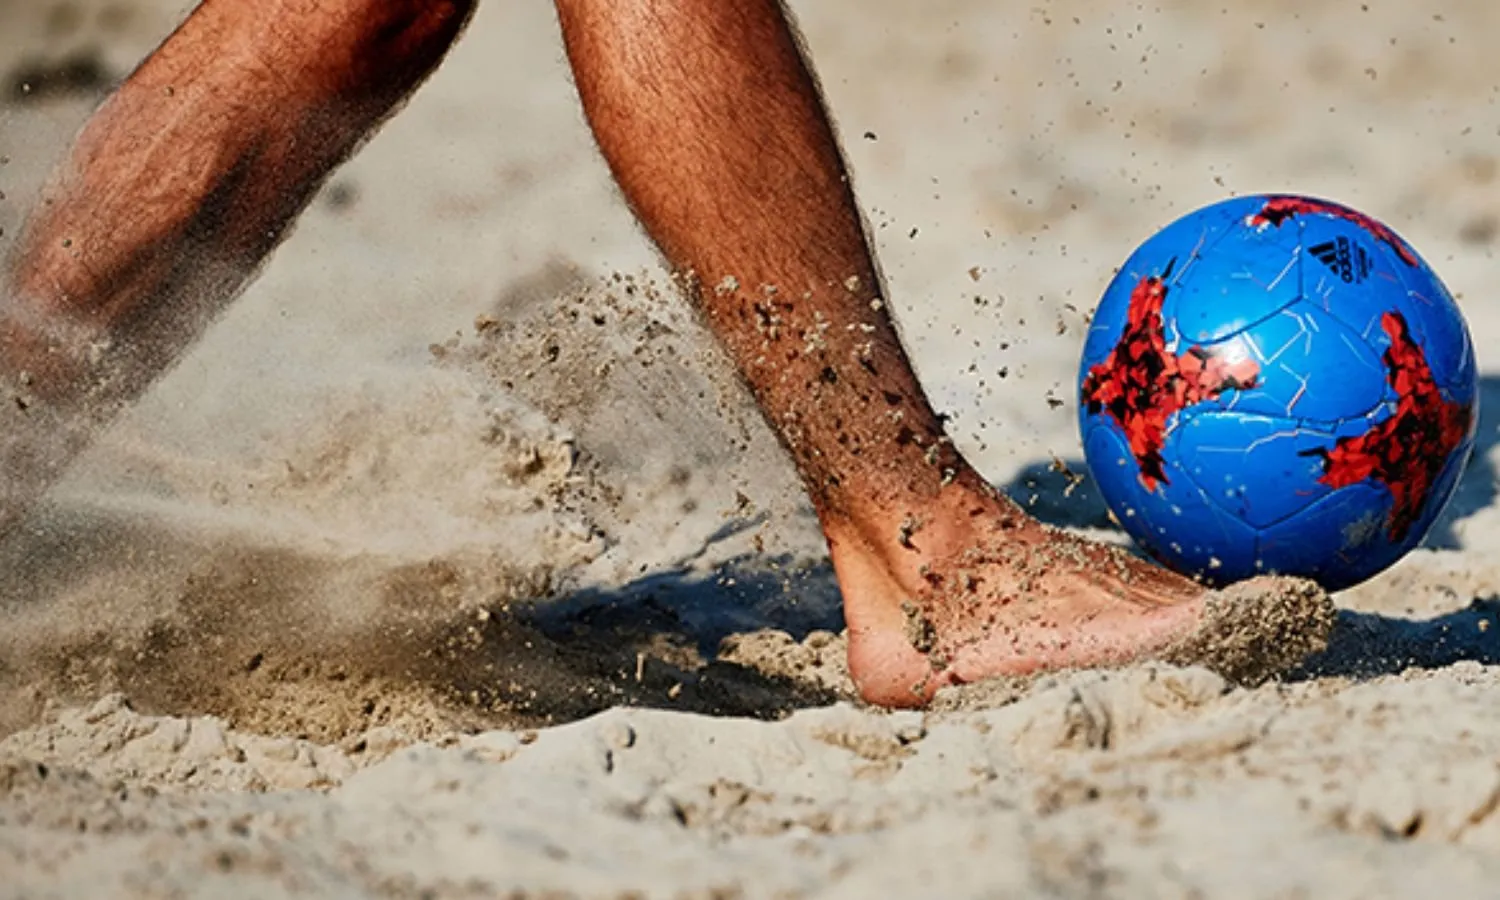 The upcoming National Games will see a new sport in beach soccer. Image- The Bridge  